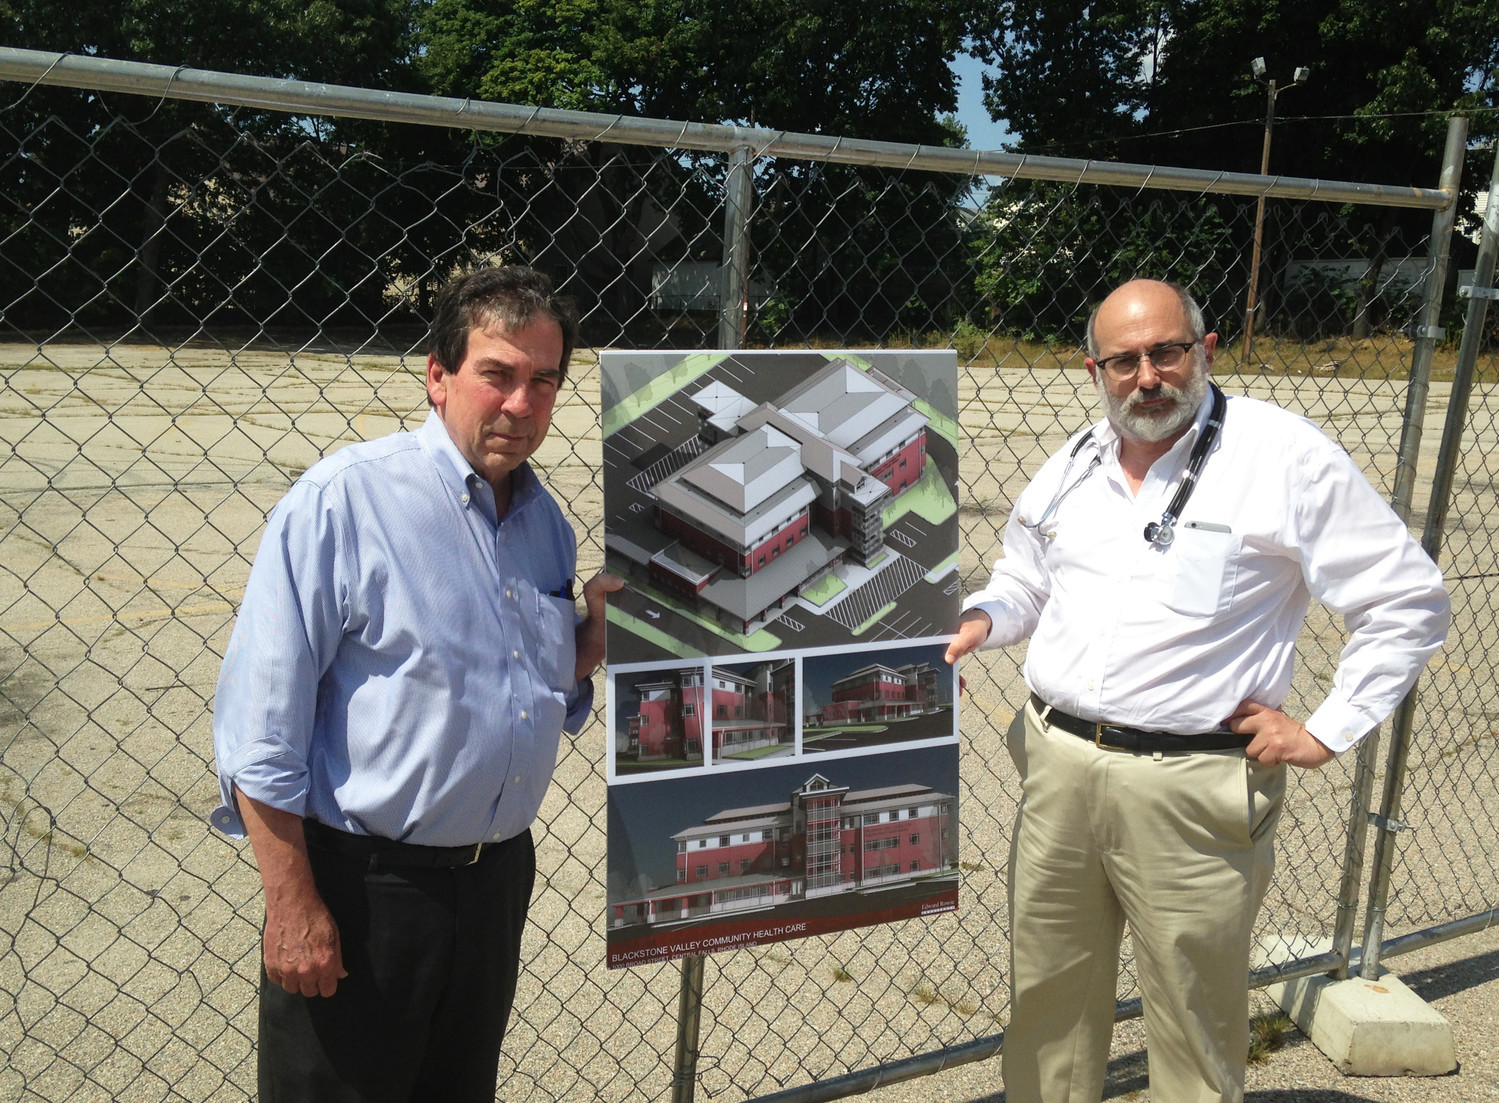 Ray Lavoie, left, the executive director of Blackstone Valley Community Health Care, and Dr. Michael Fine, senior clinical and population health officer at Blackstone Valley, at the site of the Neighborhood Health Station in Central Falls. Construction is almost completed now, with an opening scheduled for this fall.